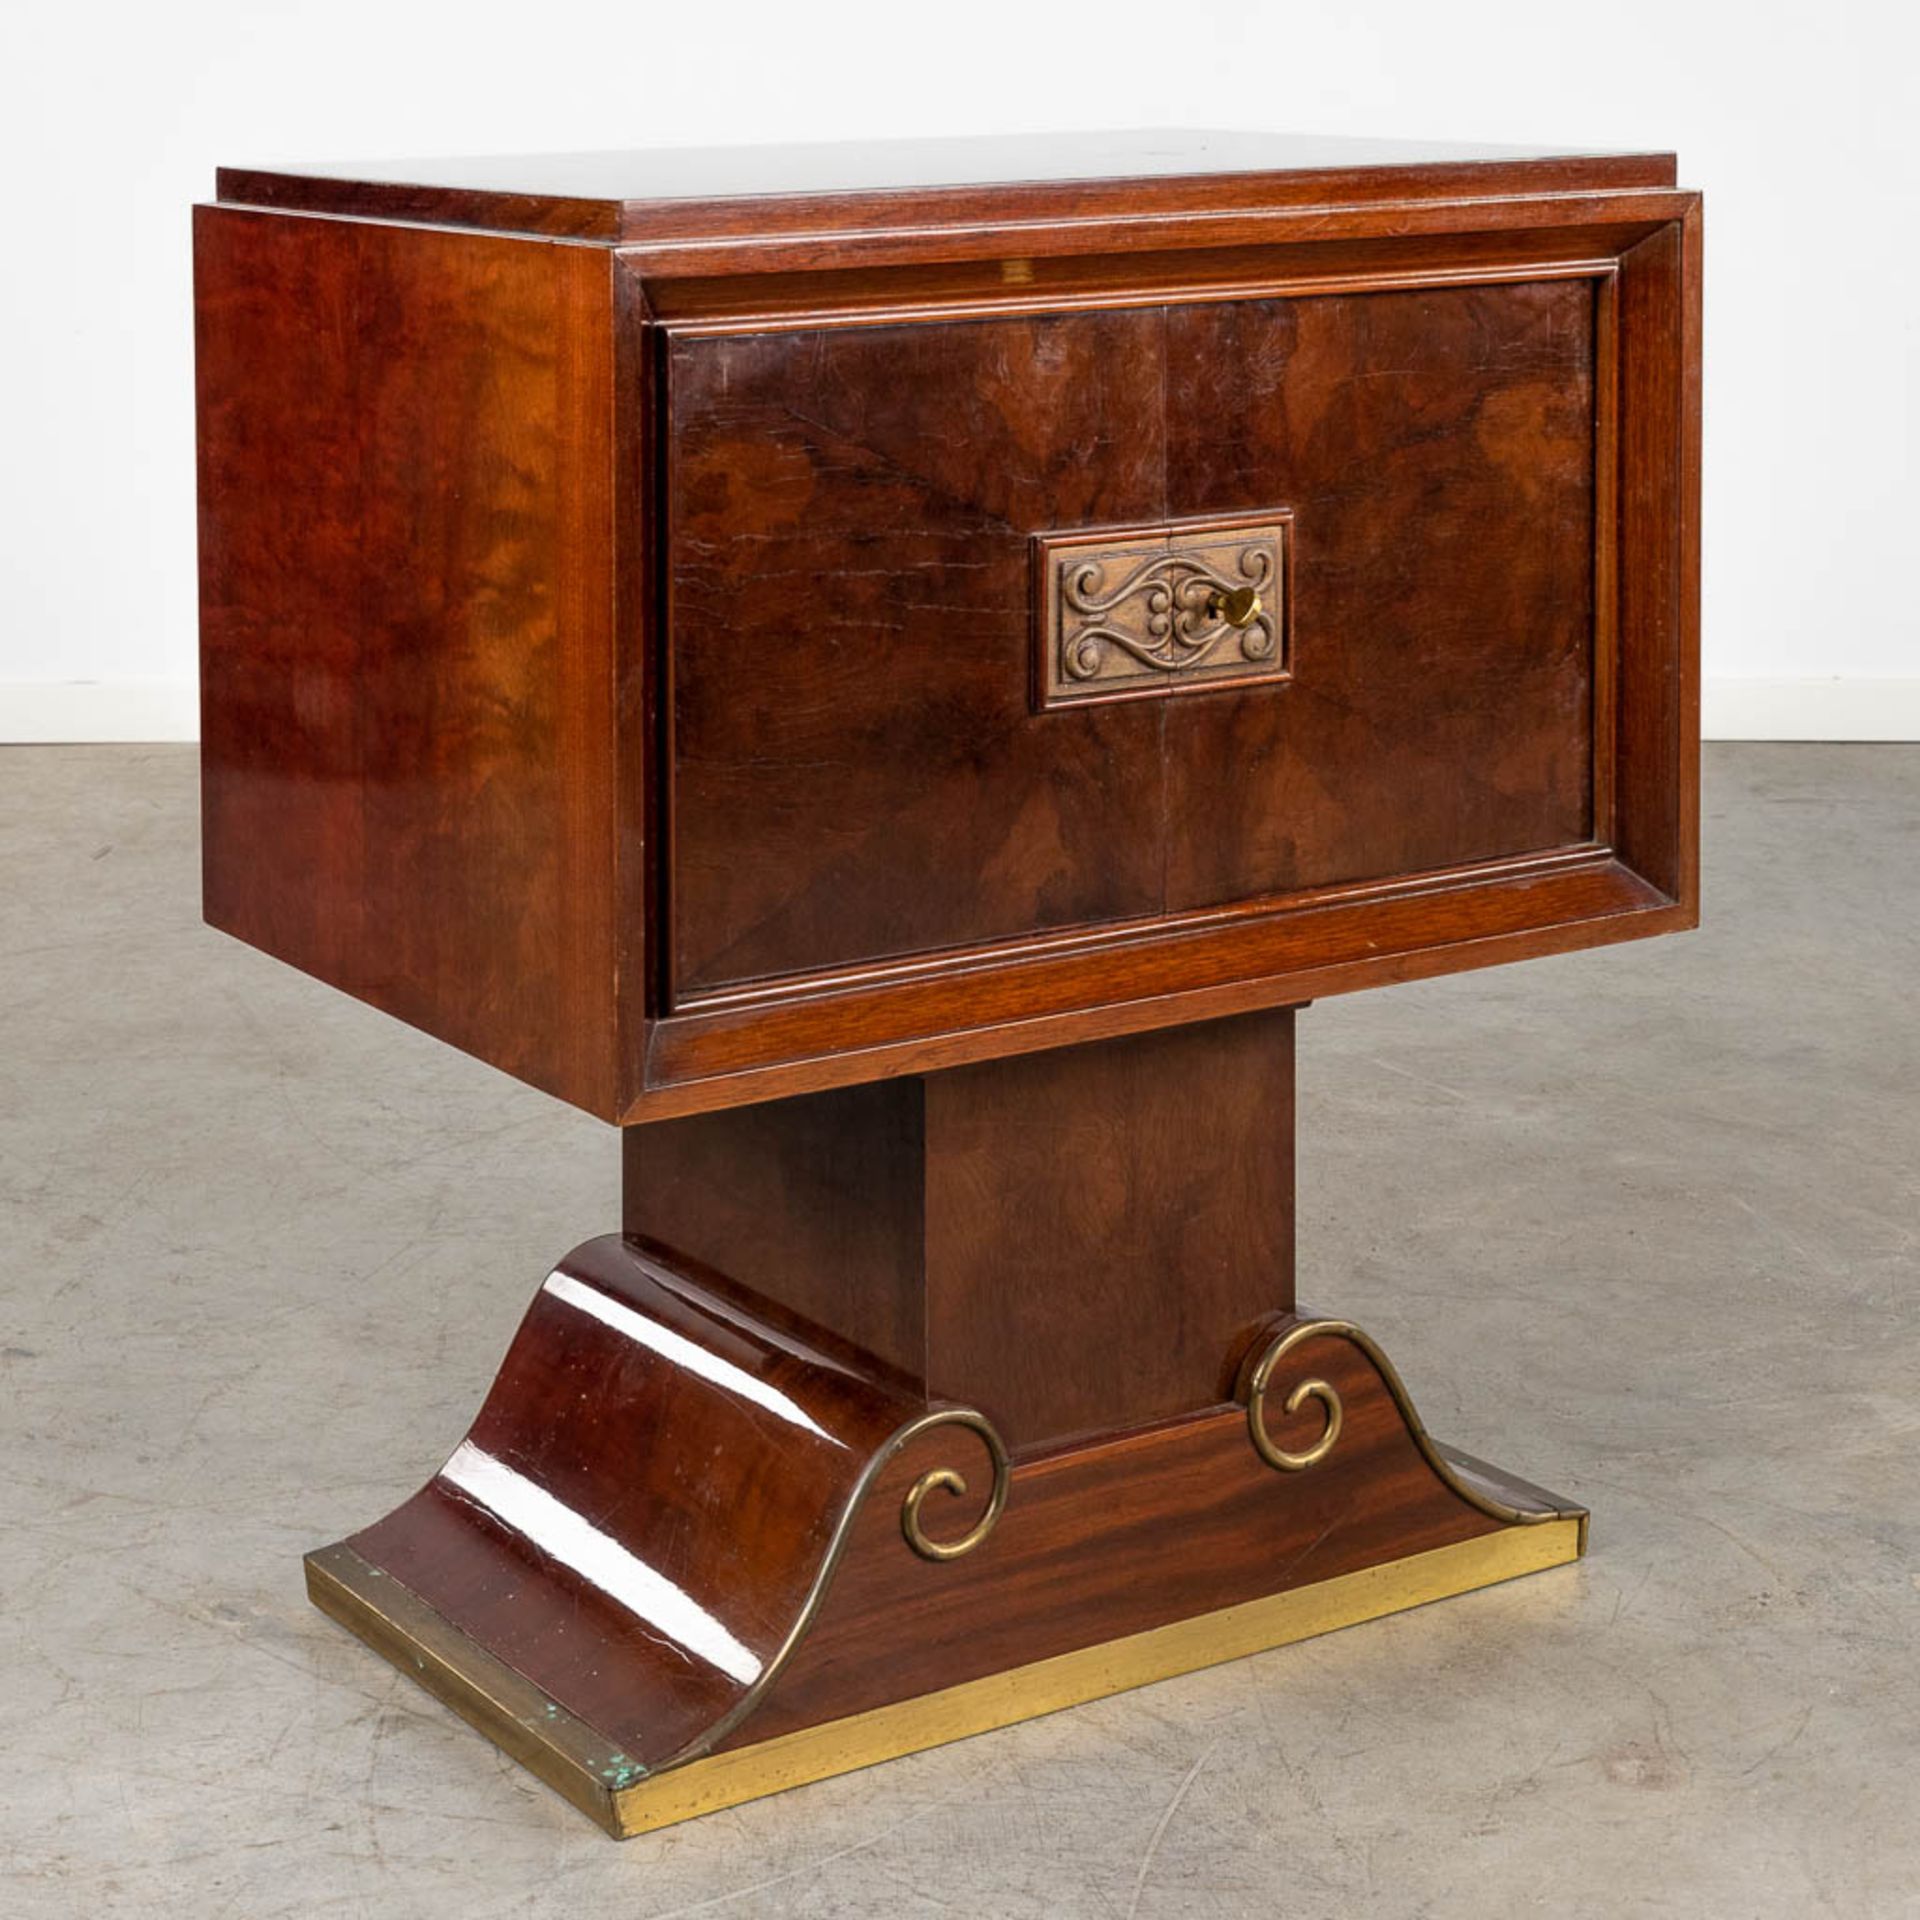 A cutlery case, veneered wood with 4 drawers, Probably made by Decoene. Circa 1950. (D:44 x W:64 x H